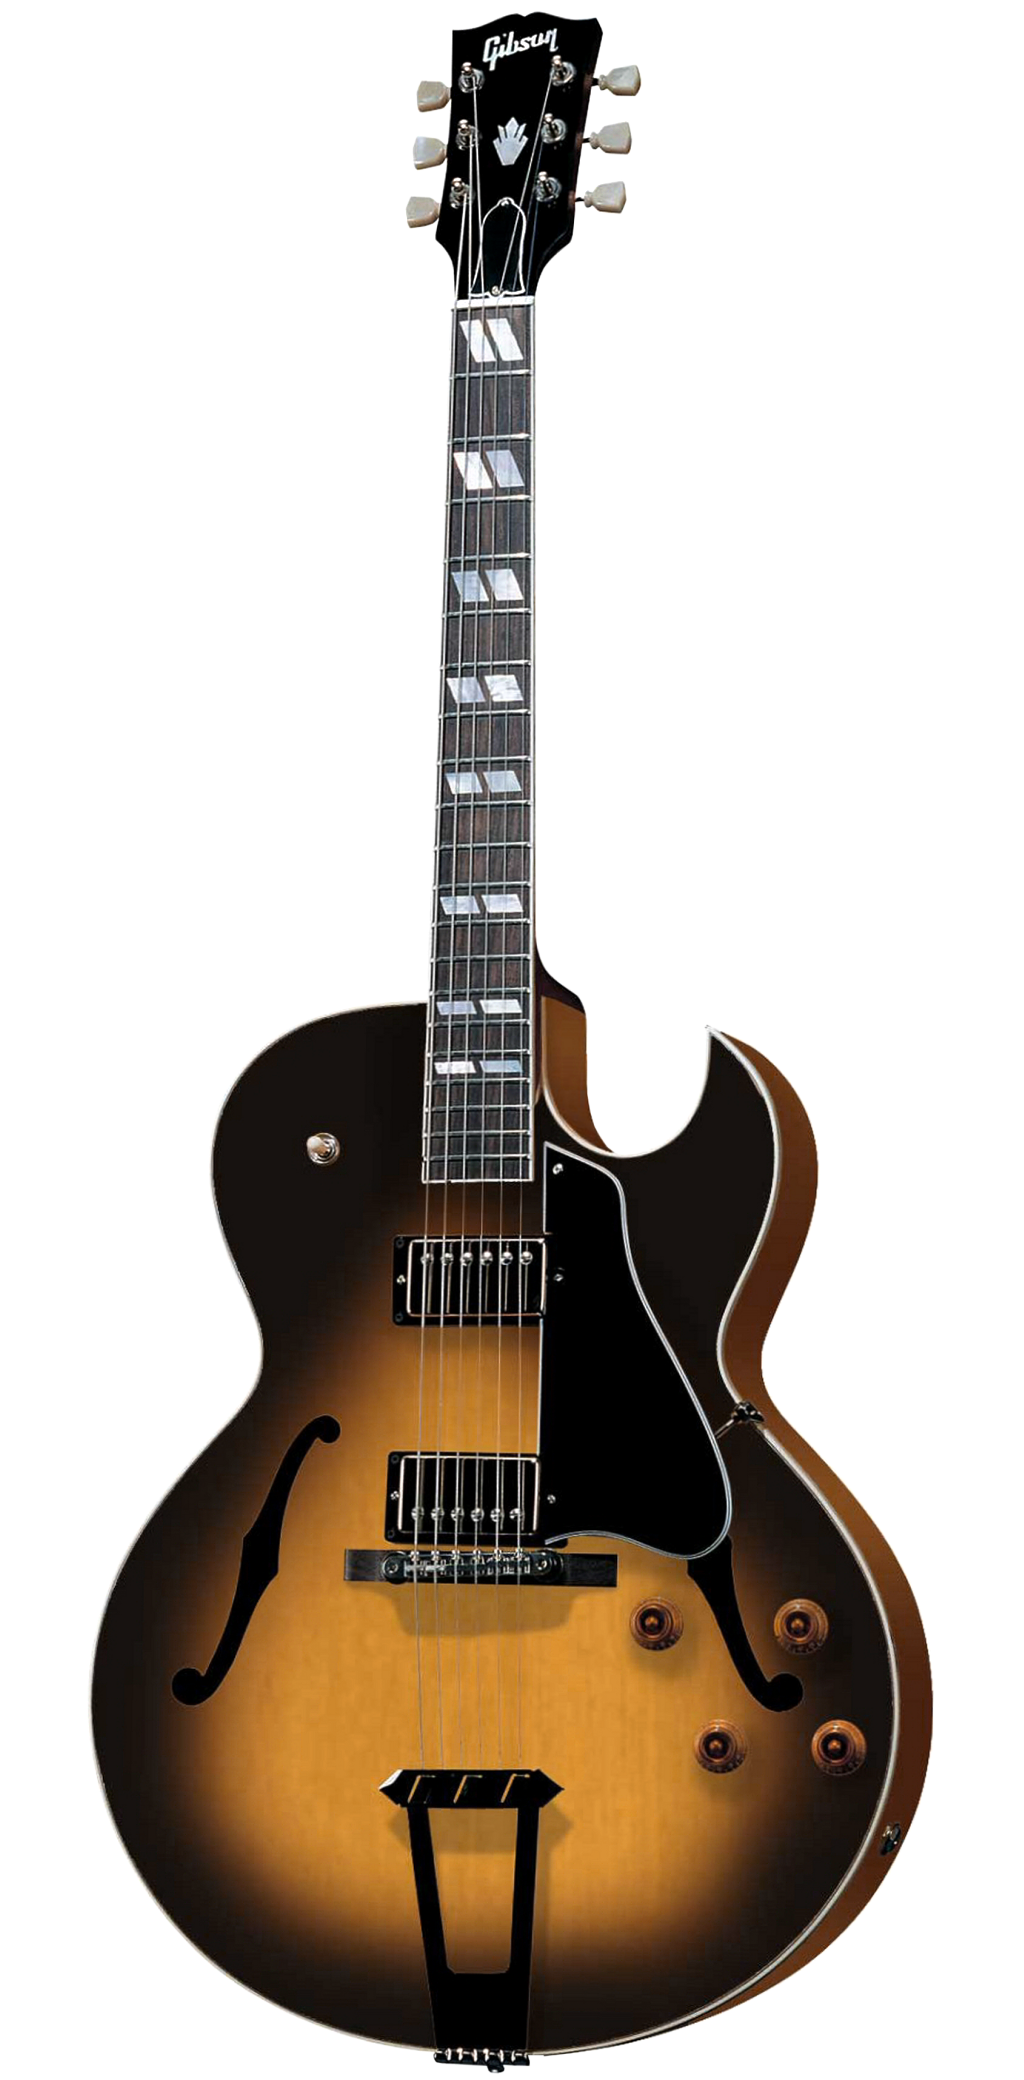 File:gibson Es 175.png - Gibson, Transparent background PNG HD thumbnail